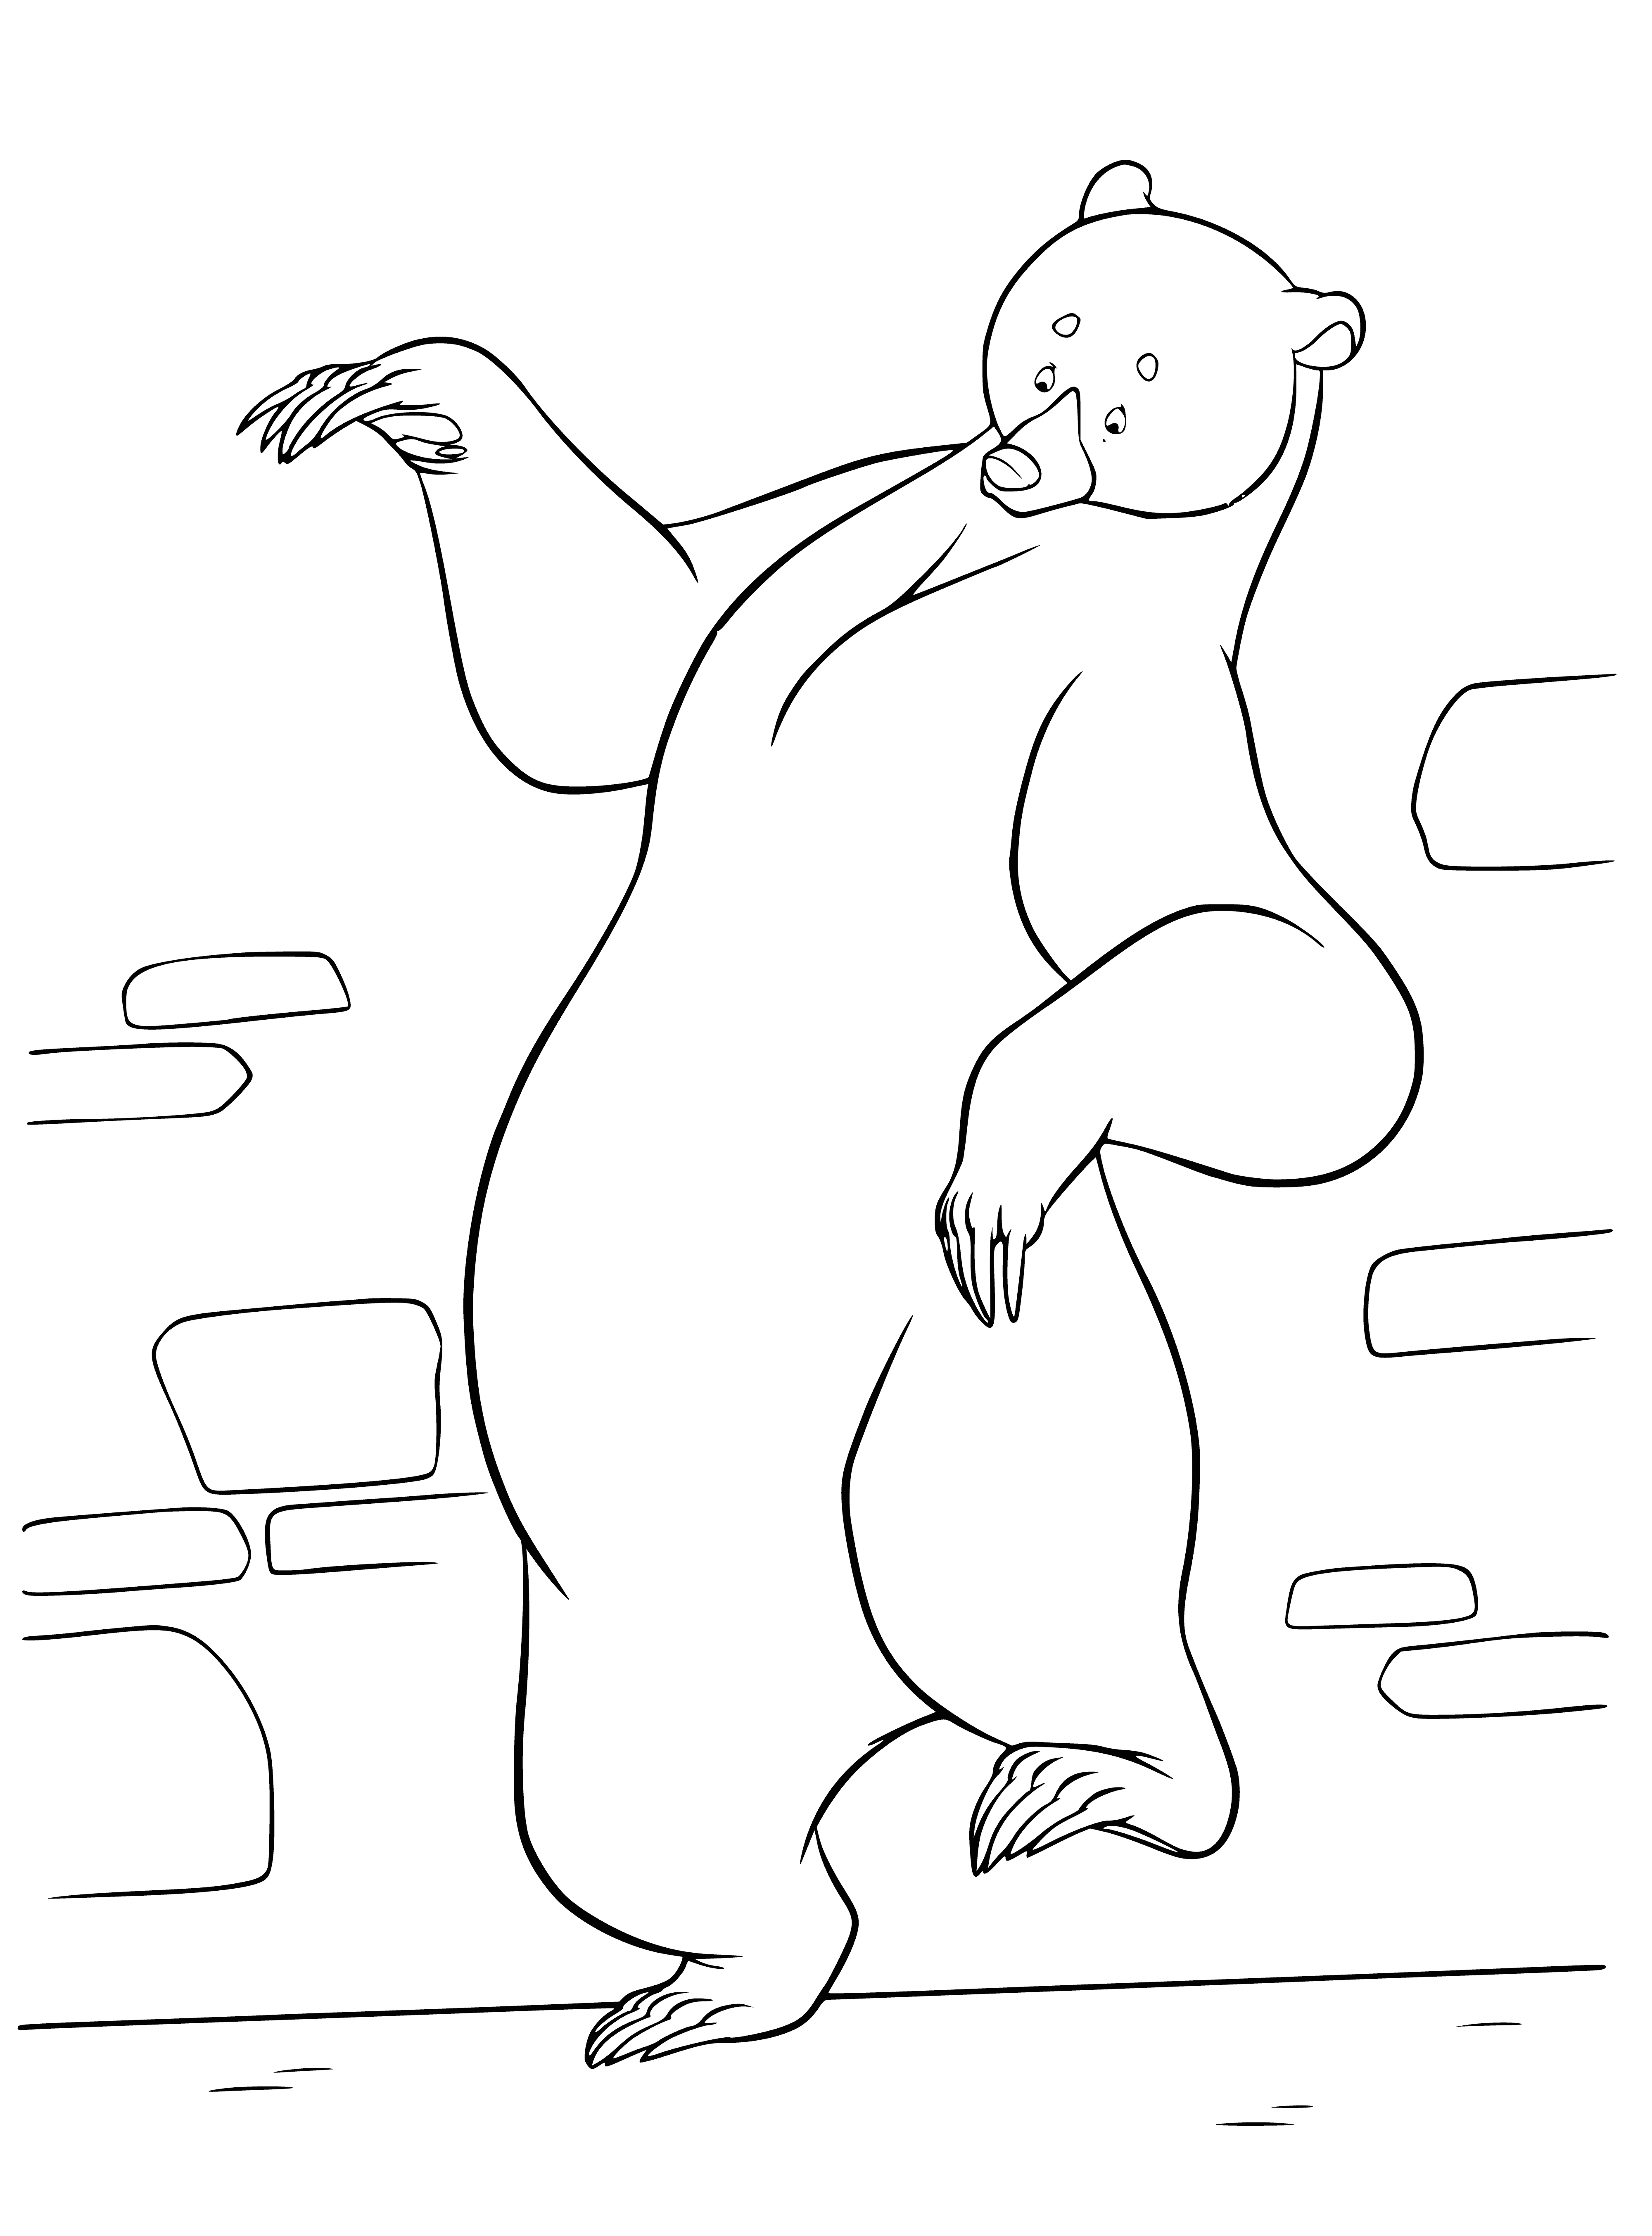 coloring page: A fierce brown bear stands in front of a snow-covered mountain, with sharp teeth and long claws. It looks formidable and forbidding.